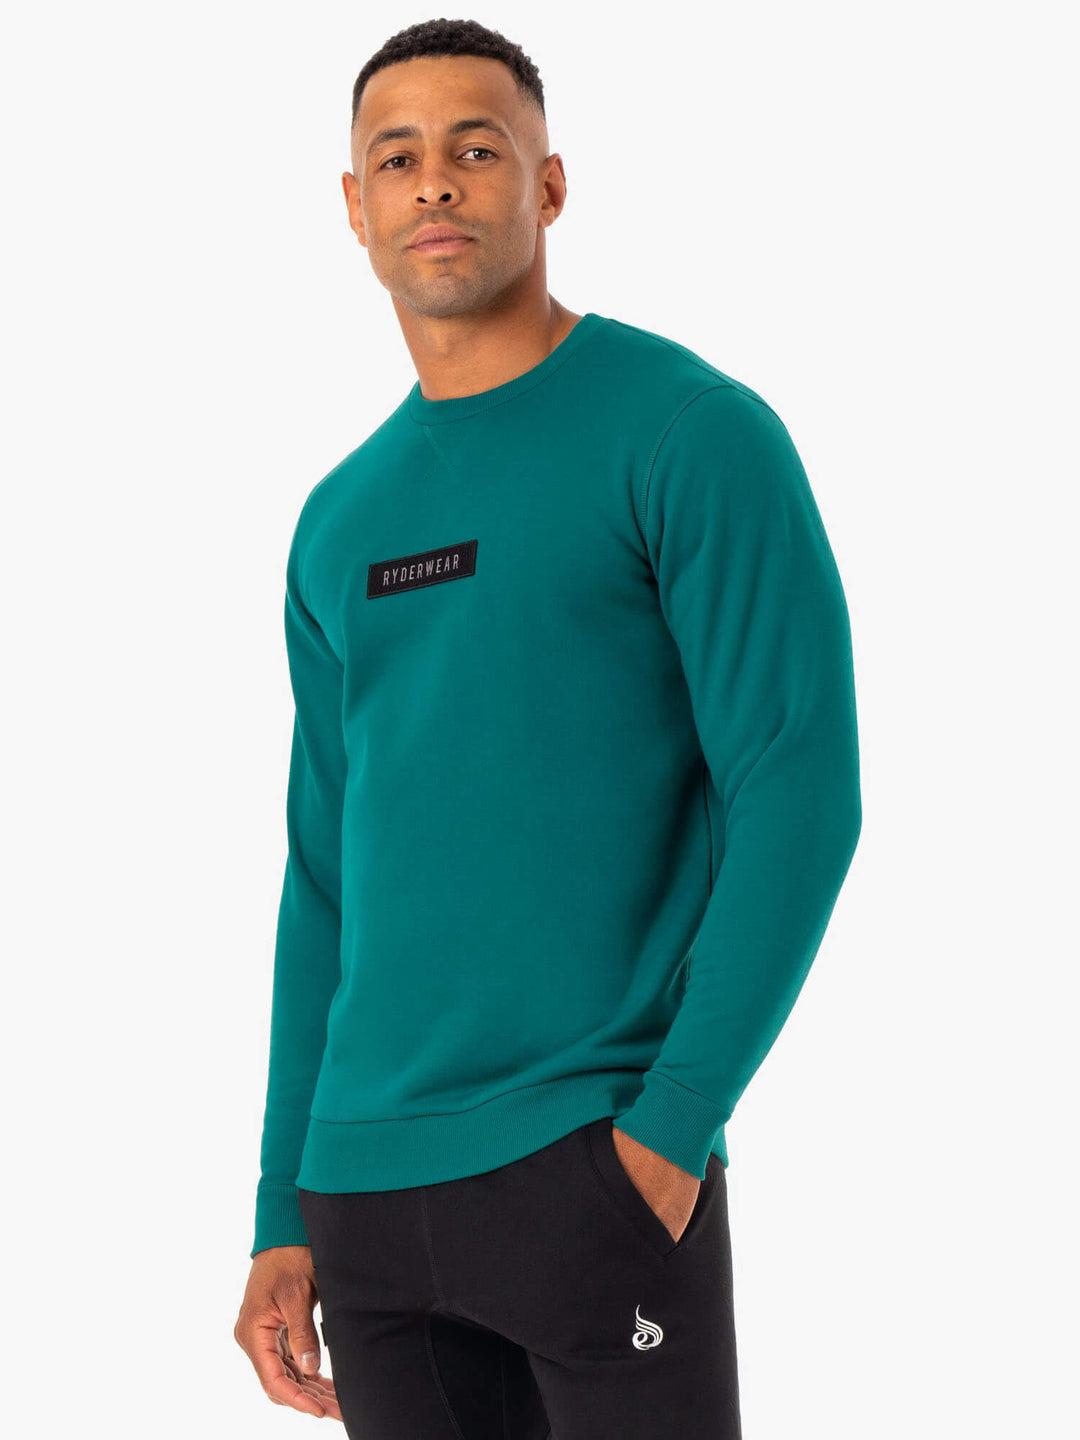 Recharge Pullover - Teal Clothing Ryderwear 